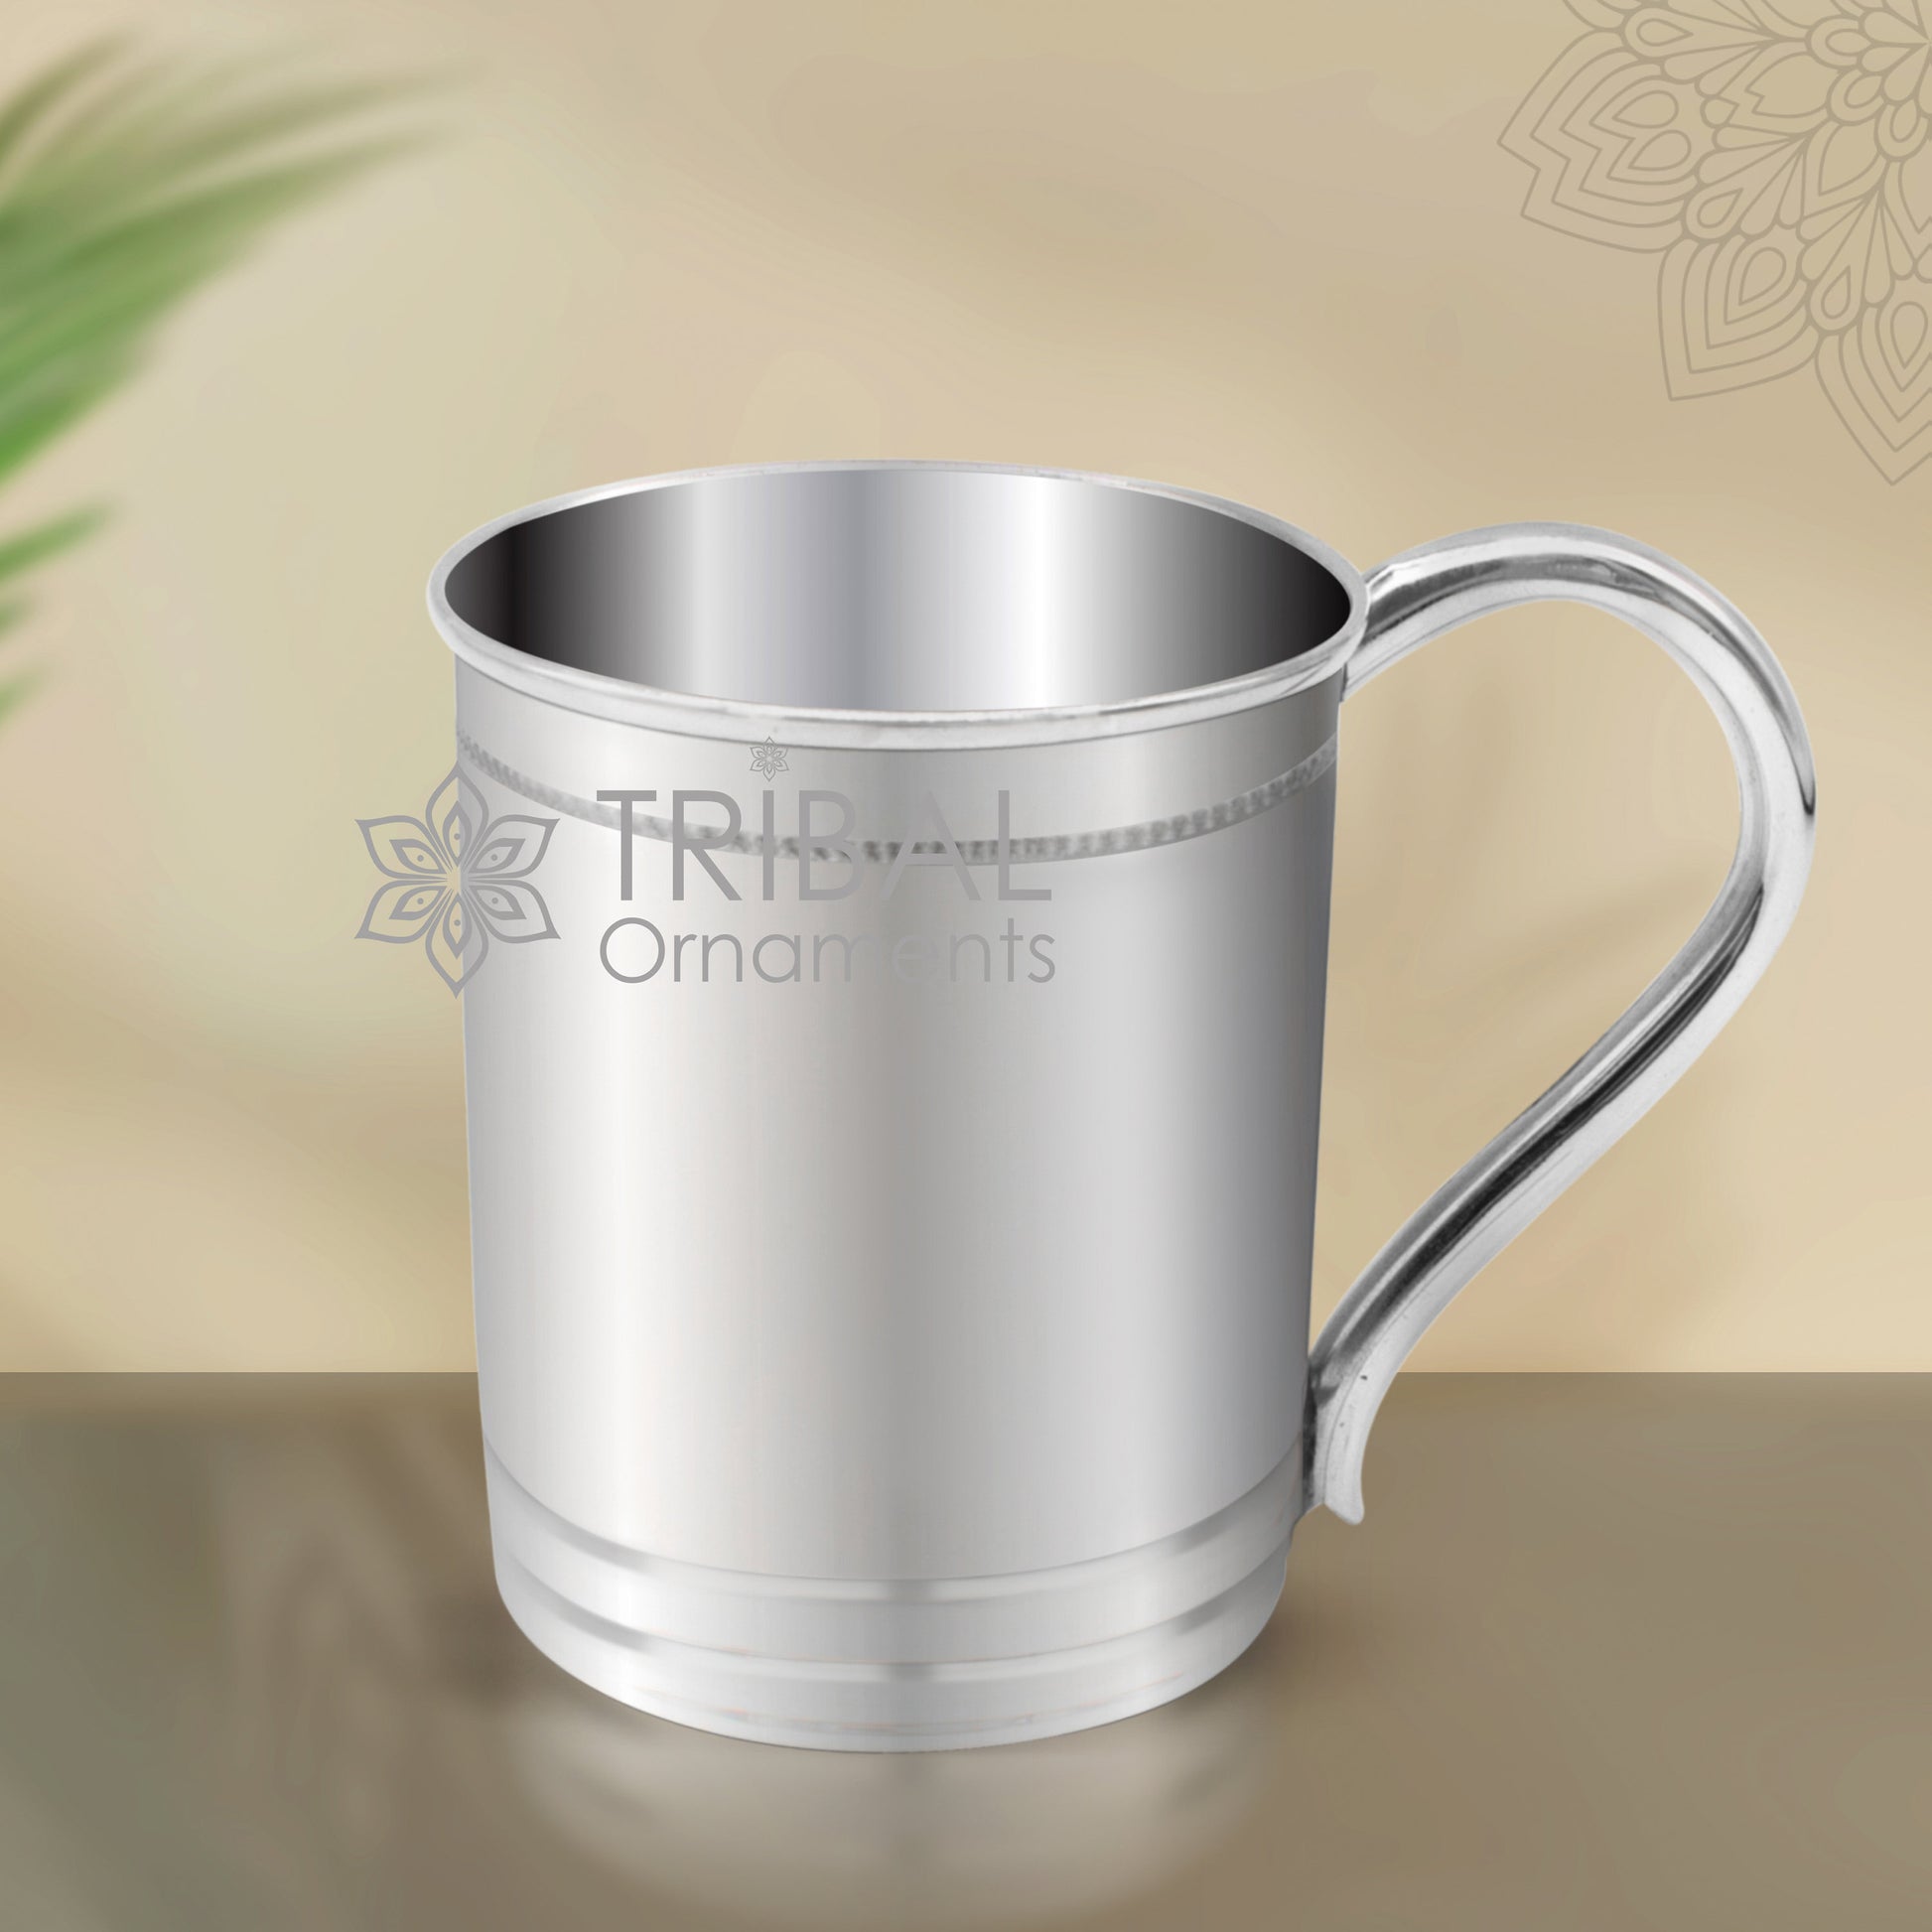 925 sterling silver handmade coffee cup or water milk cup tumbler, silver baby food flask, silver kids utensils gift sv289 - TRIBAL ORNAMENTS